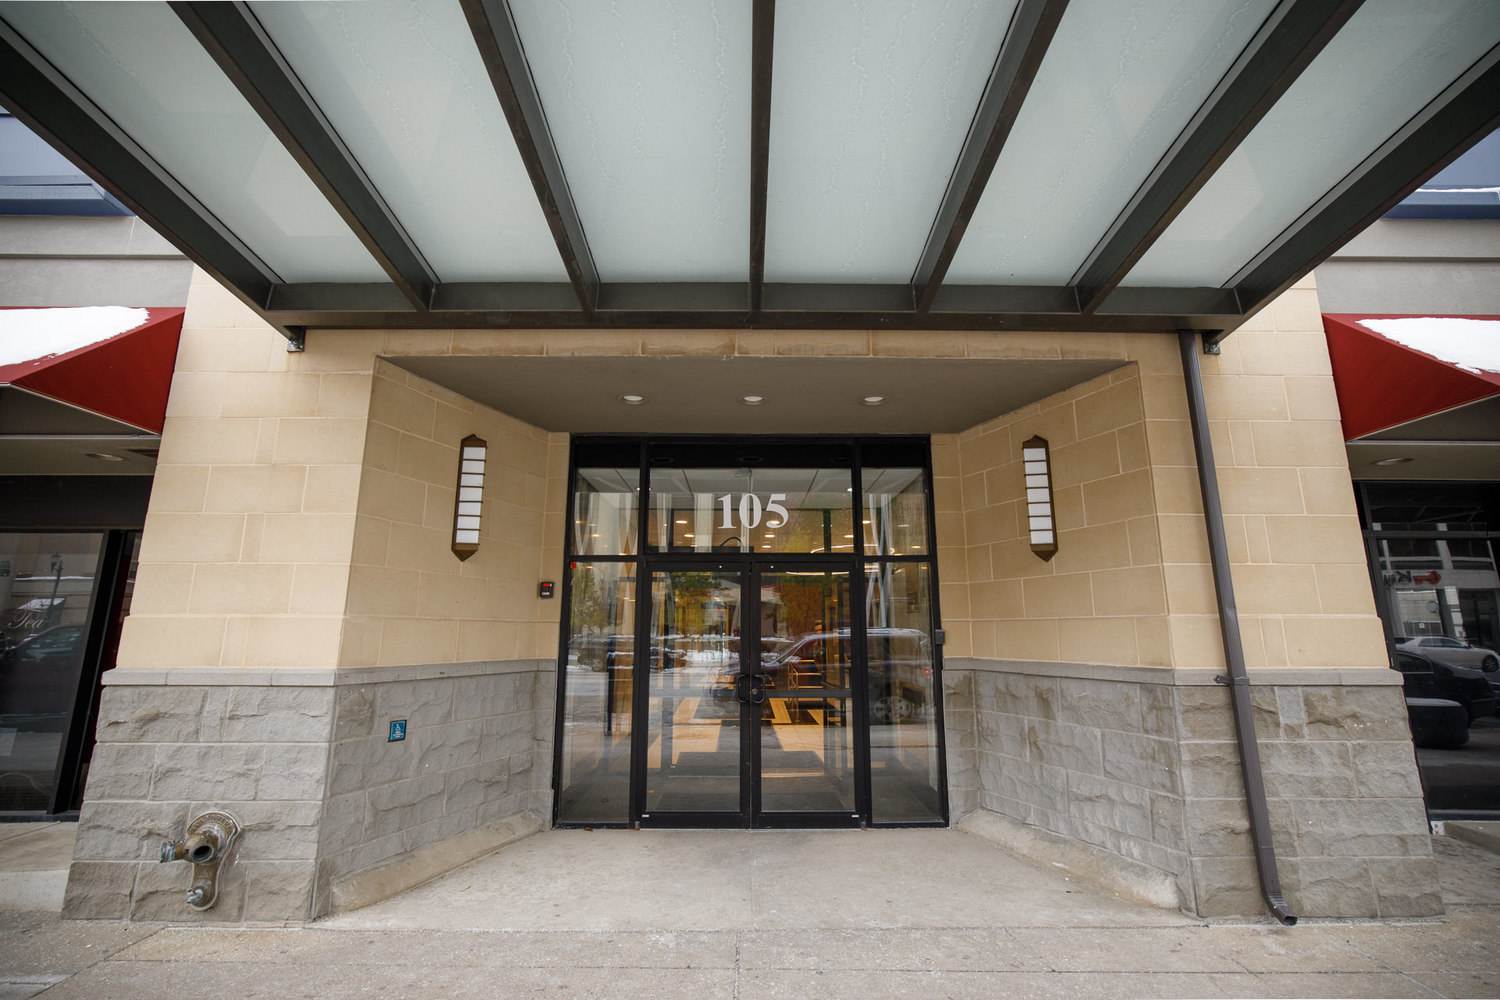 Gallery Photo of The entrance to our building